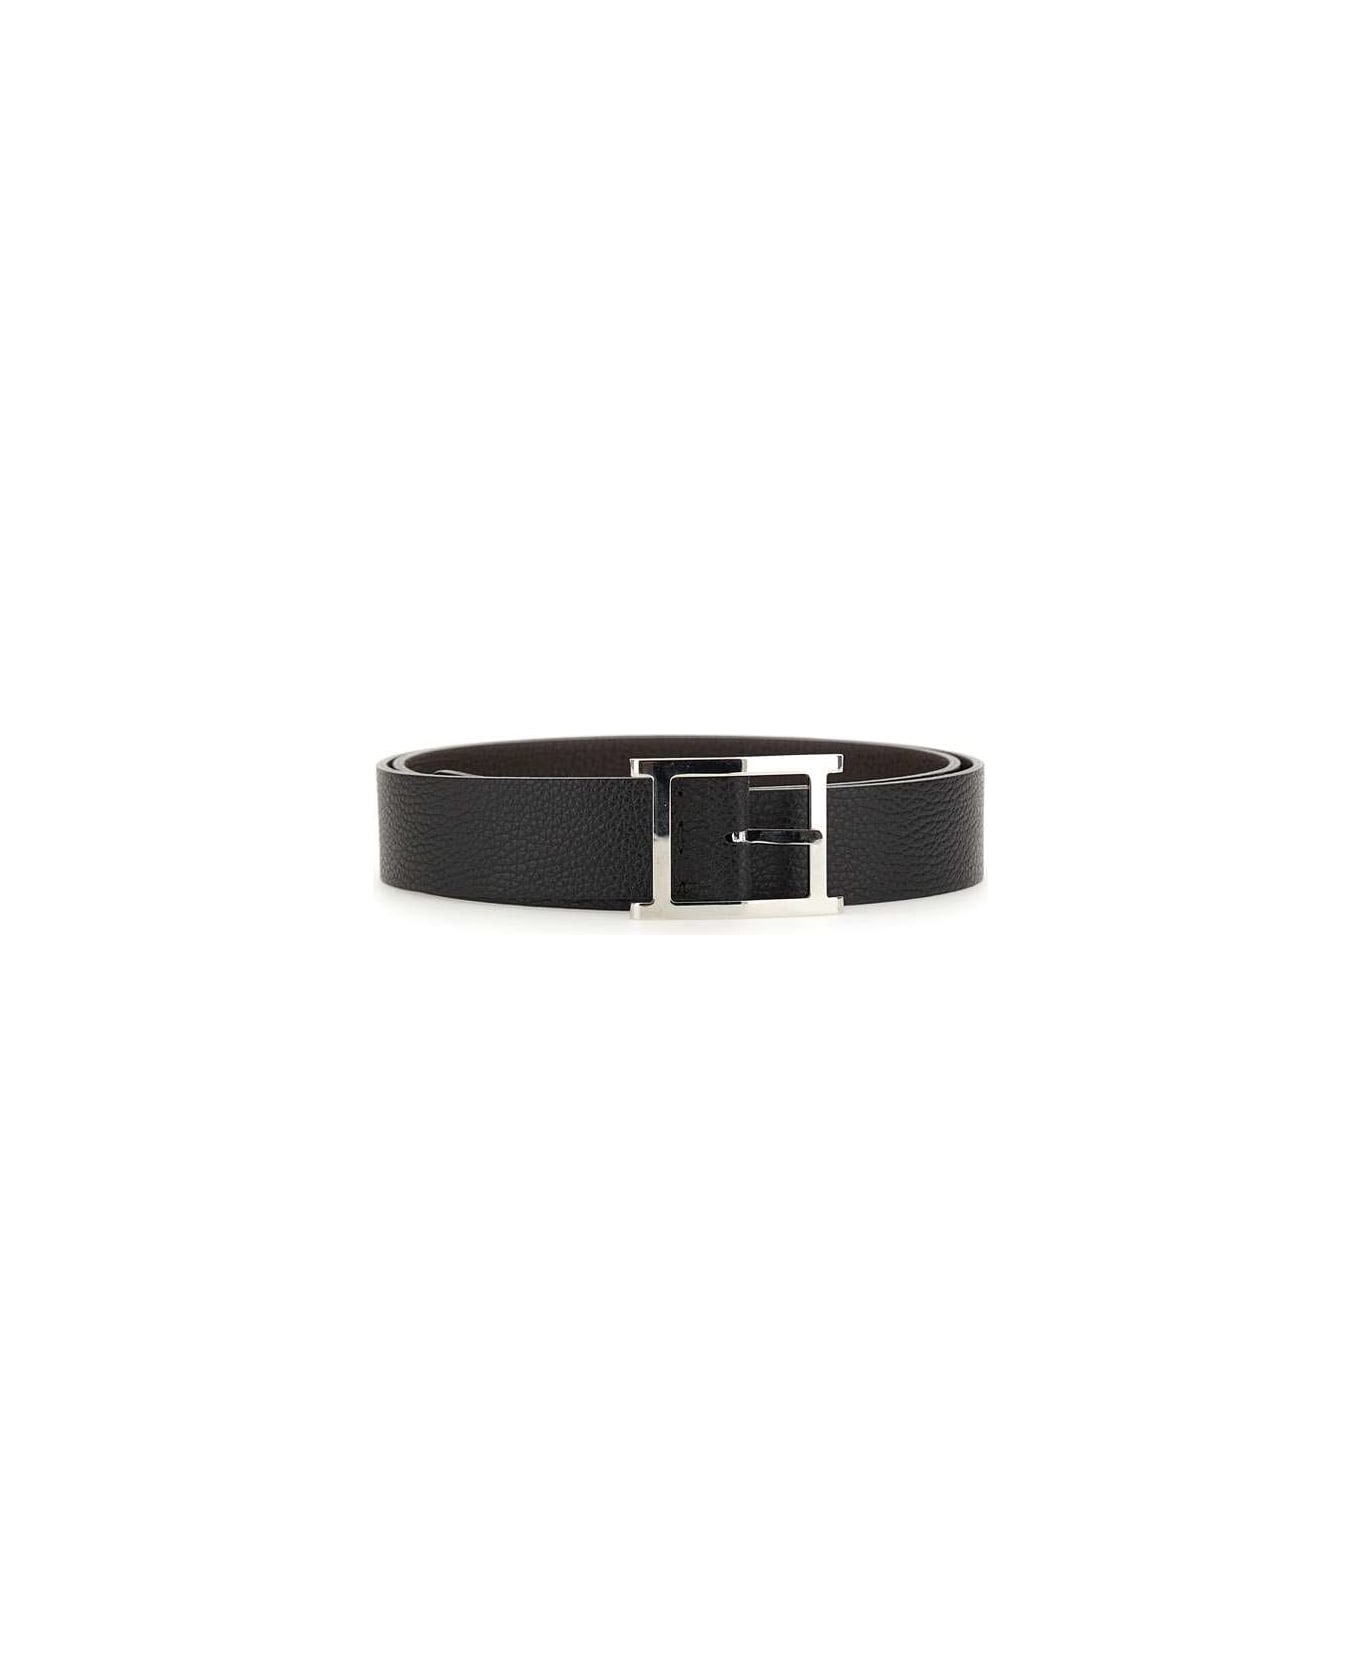 Orciani "micron Double" Belt - BLACK/BROWN